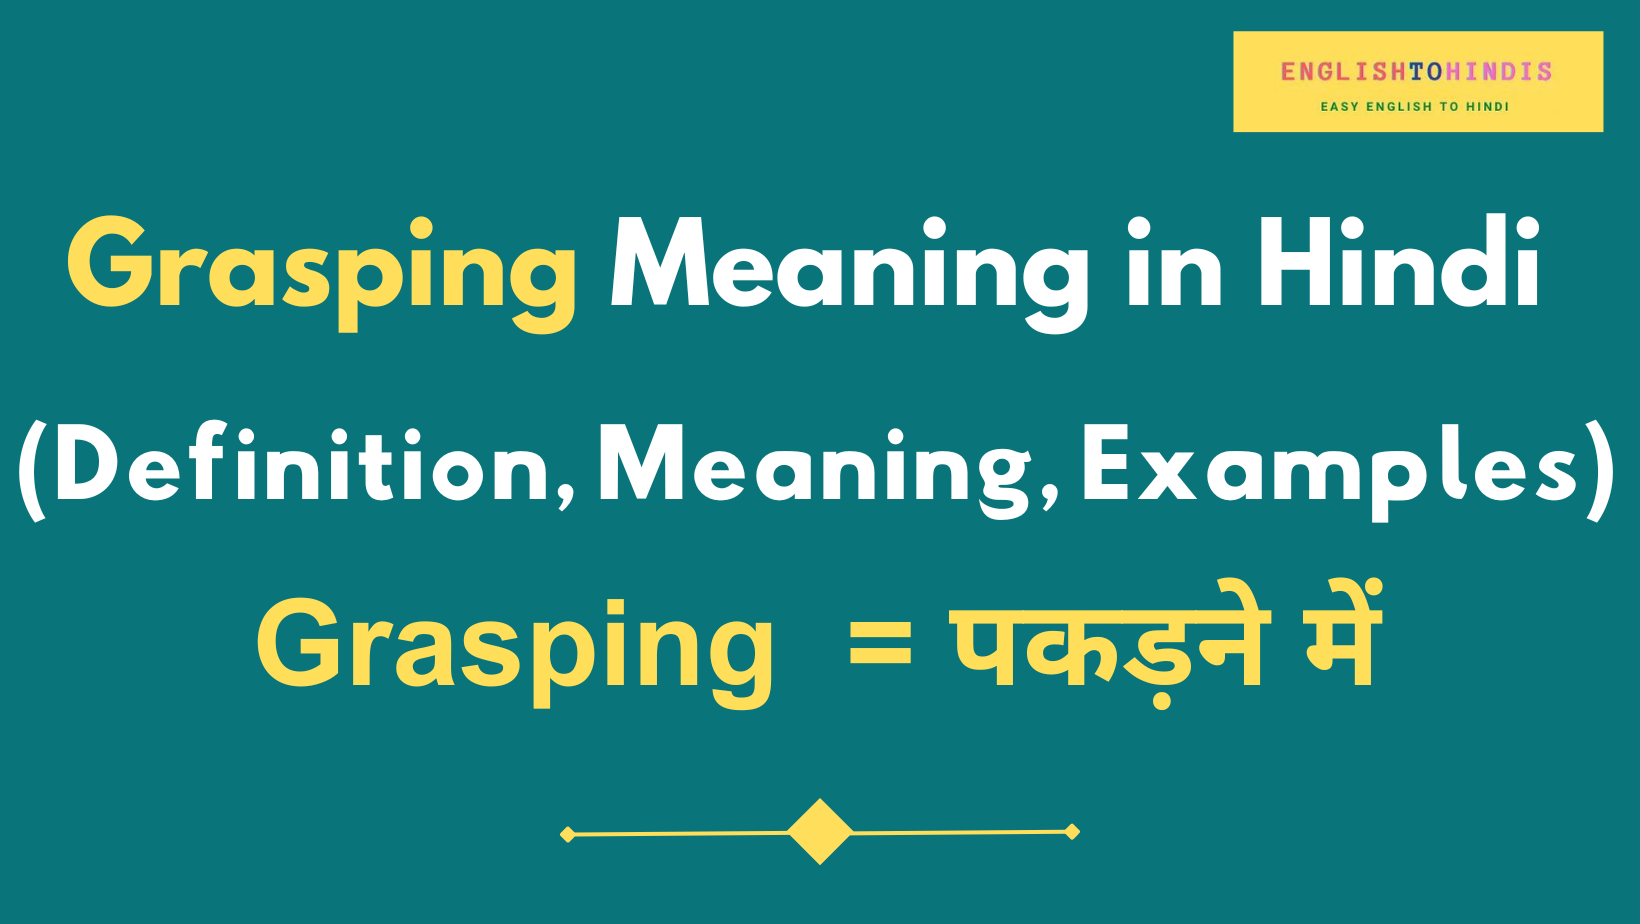 Grasping Meaning in Hindi